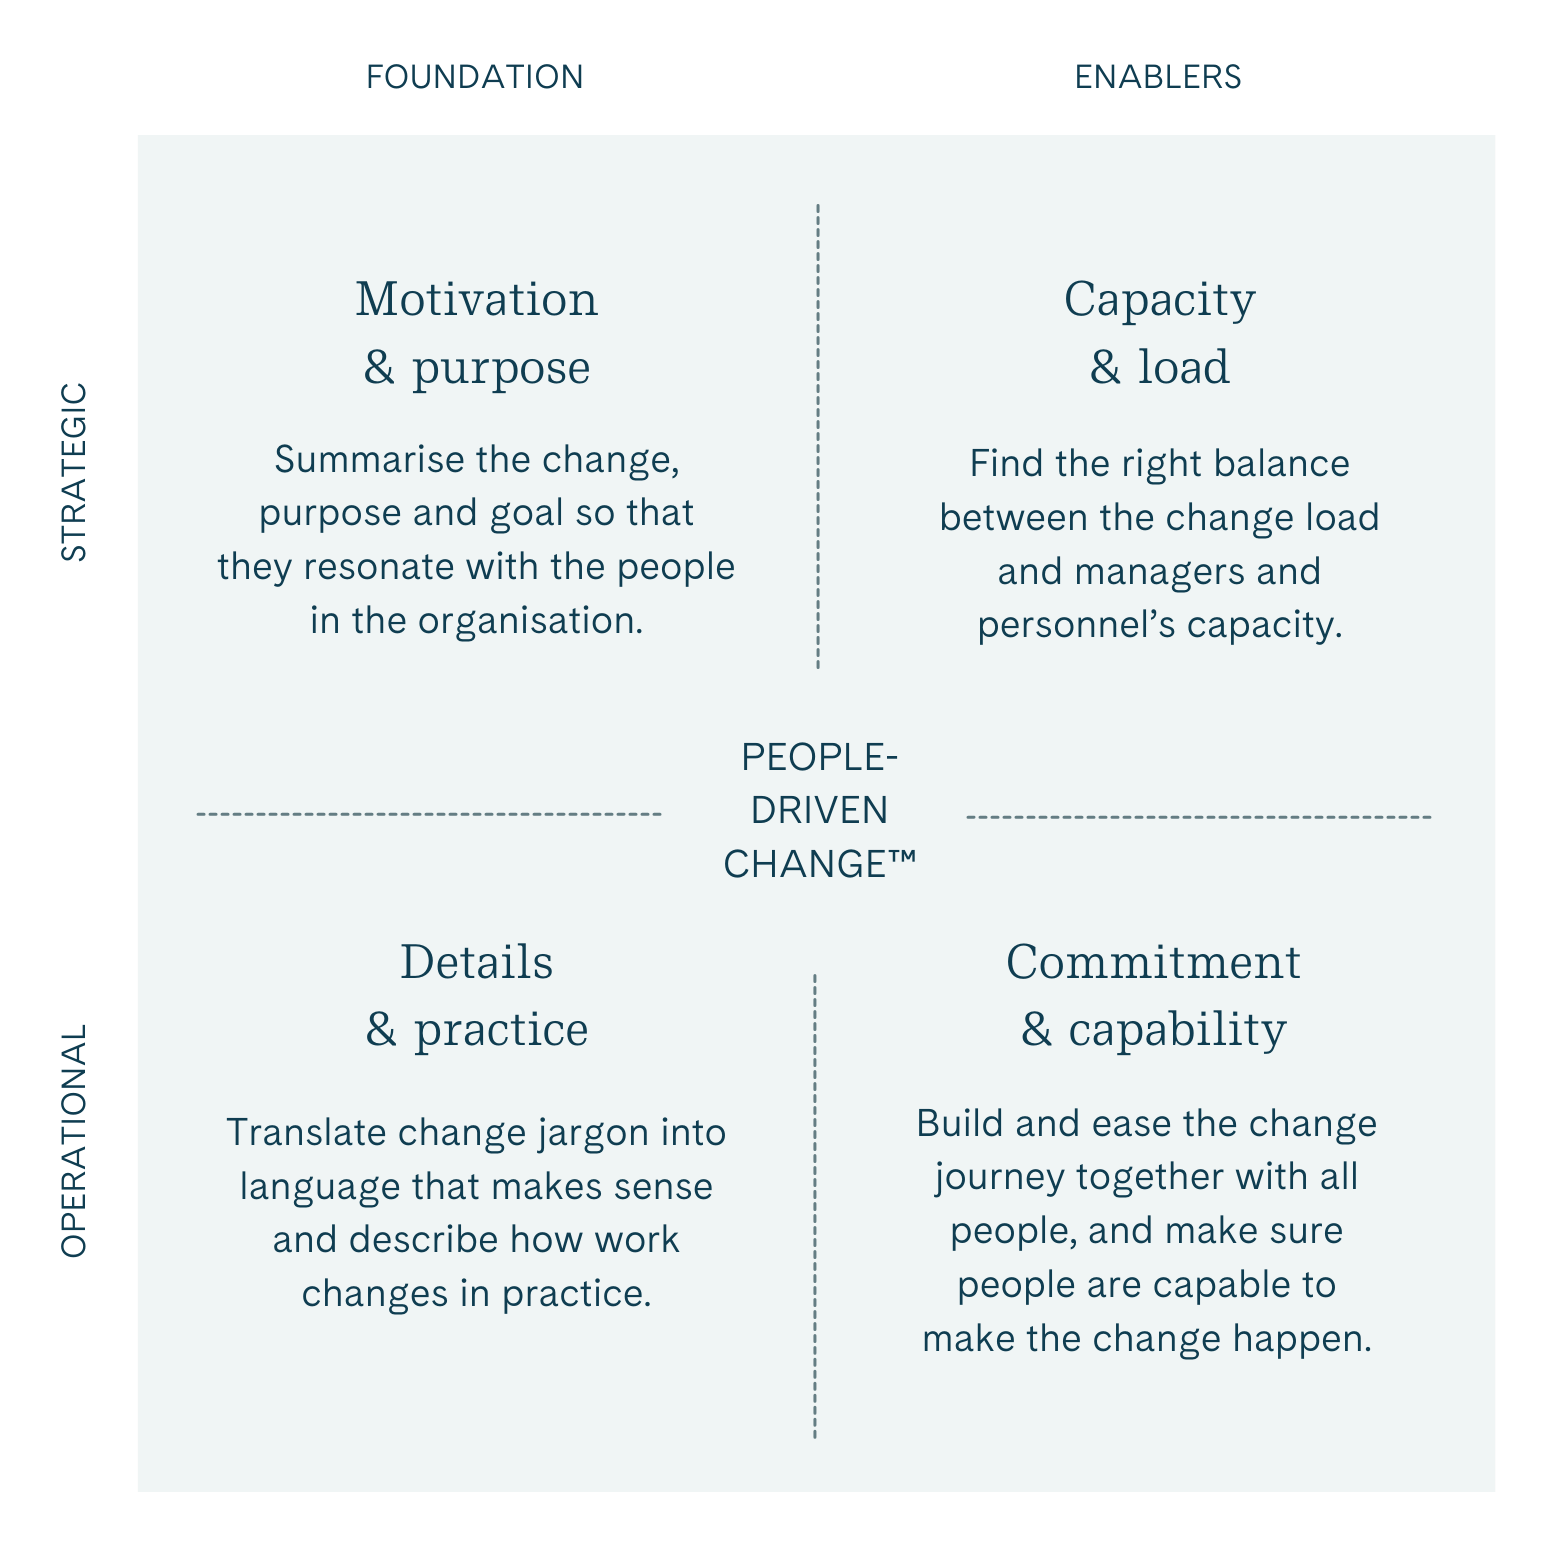 People-driven change: - The Strategic foundation is in motivation & purpose; summarising the change and the goal so that they resonate with people in the organisation. - Strategic enablers are capacity & load; finding the balance between change load and managers and personnell's capacity. - The operational foundation is in details and practice; translating change jargon into language that makes sense and describing the change in practice. - Operational enablers are commitment & capability; build and ease the change journey together with all people, making sure they're capable of making it happen.